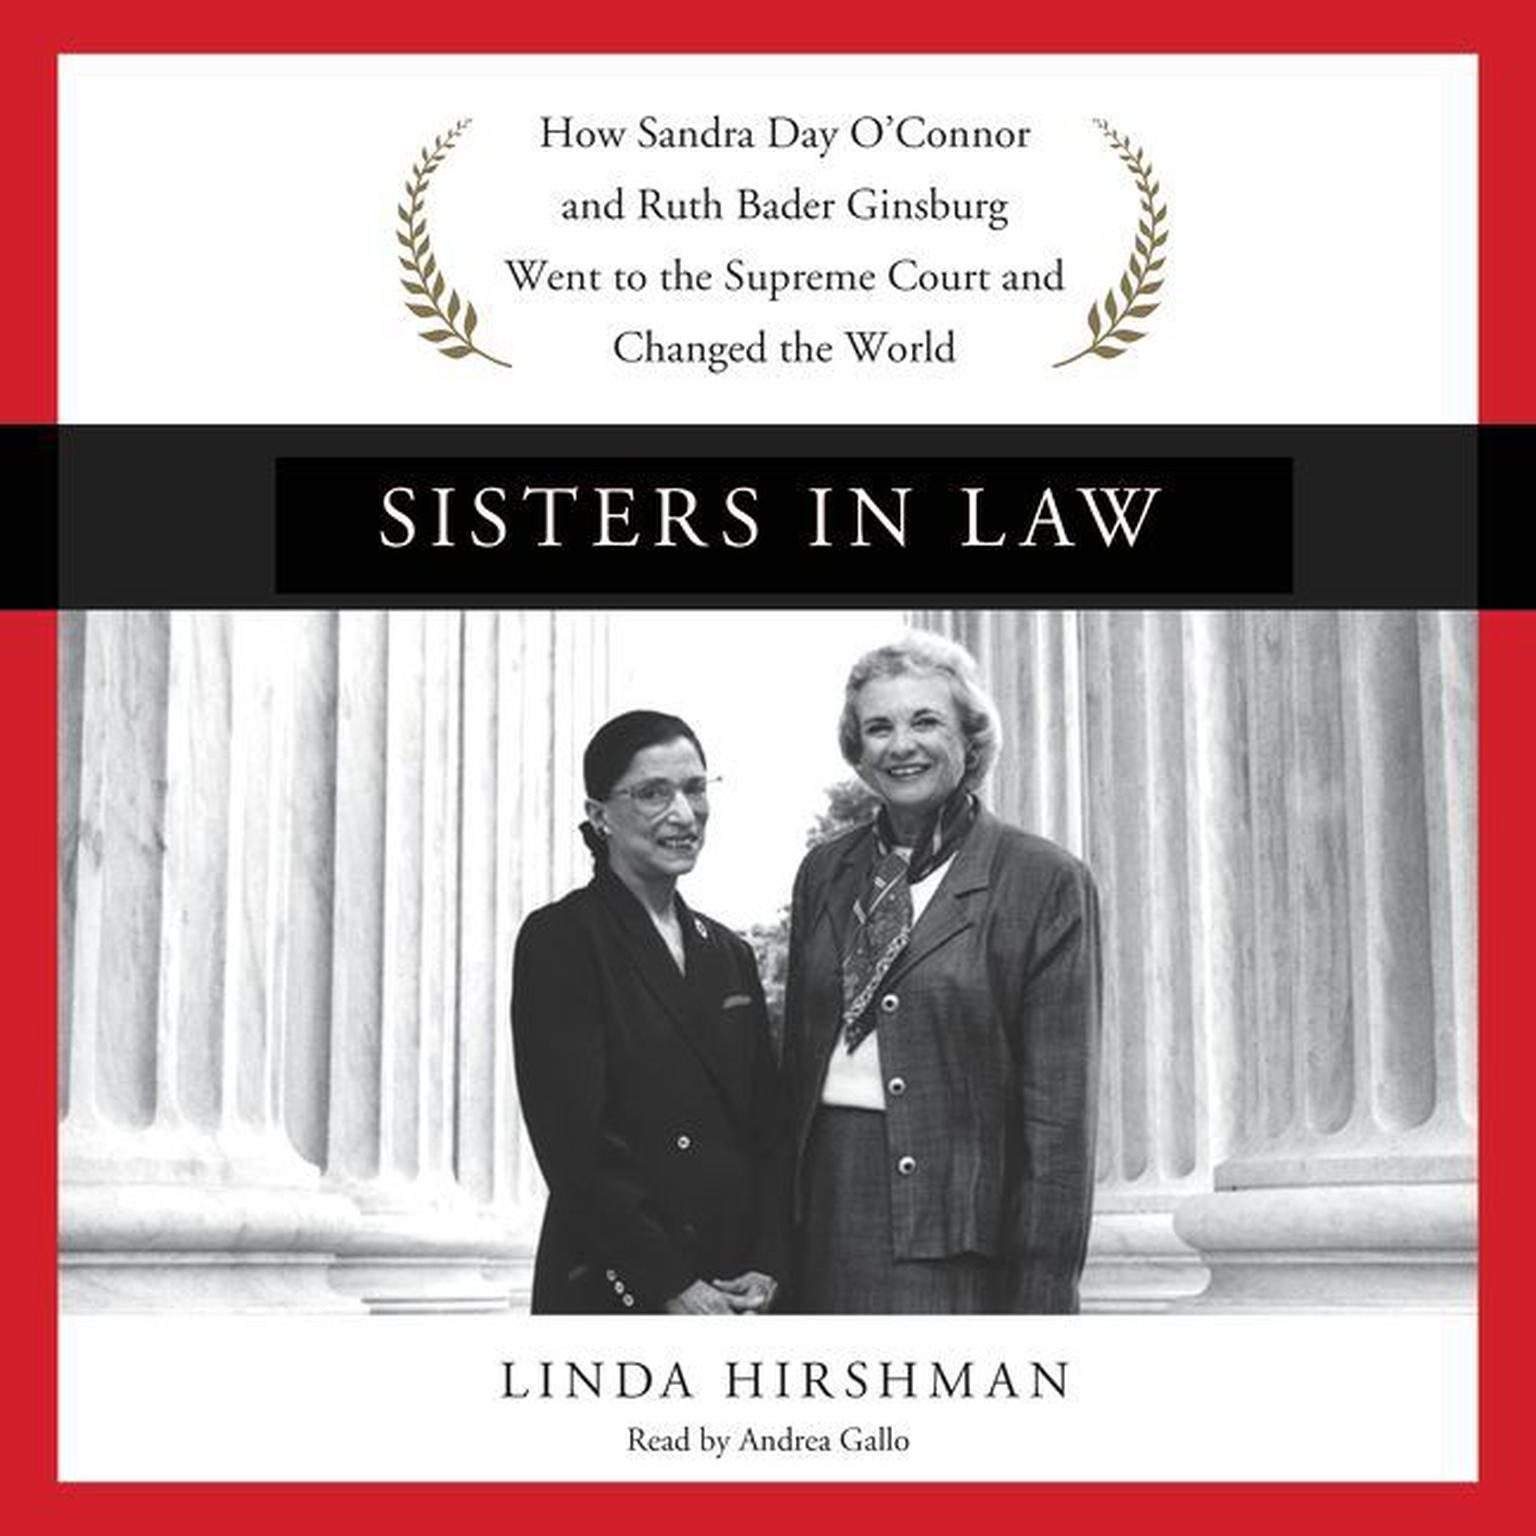 Sisters in Law: How Sandra Day OConnor and Ruth Bader Ginsburg Went to the Supreme Court and Changed the World Audiobook, by Linda Hirshman